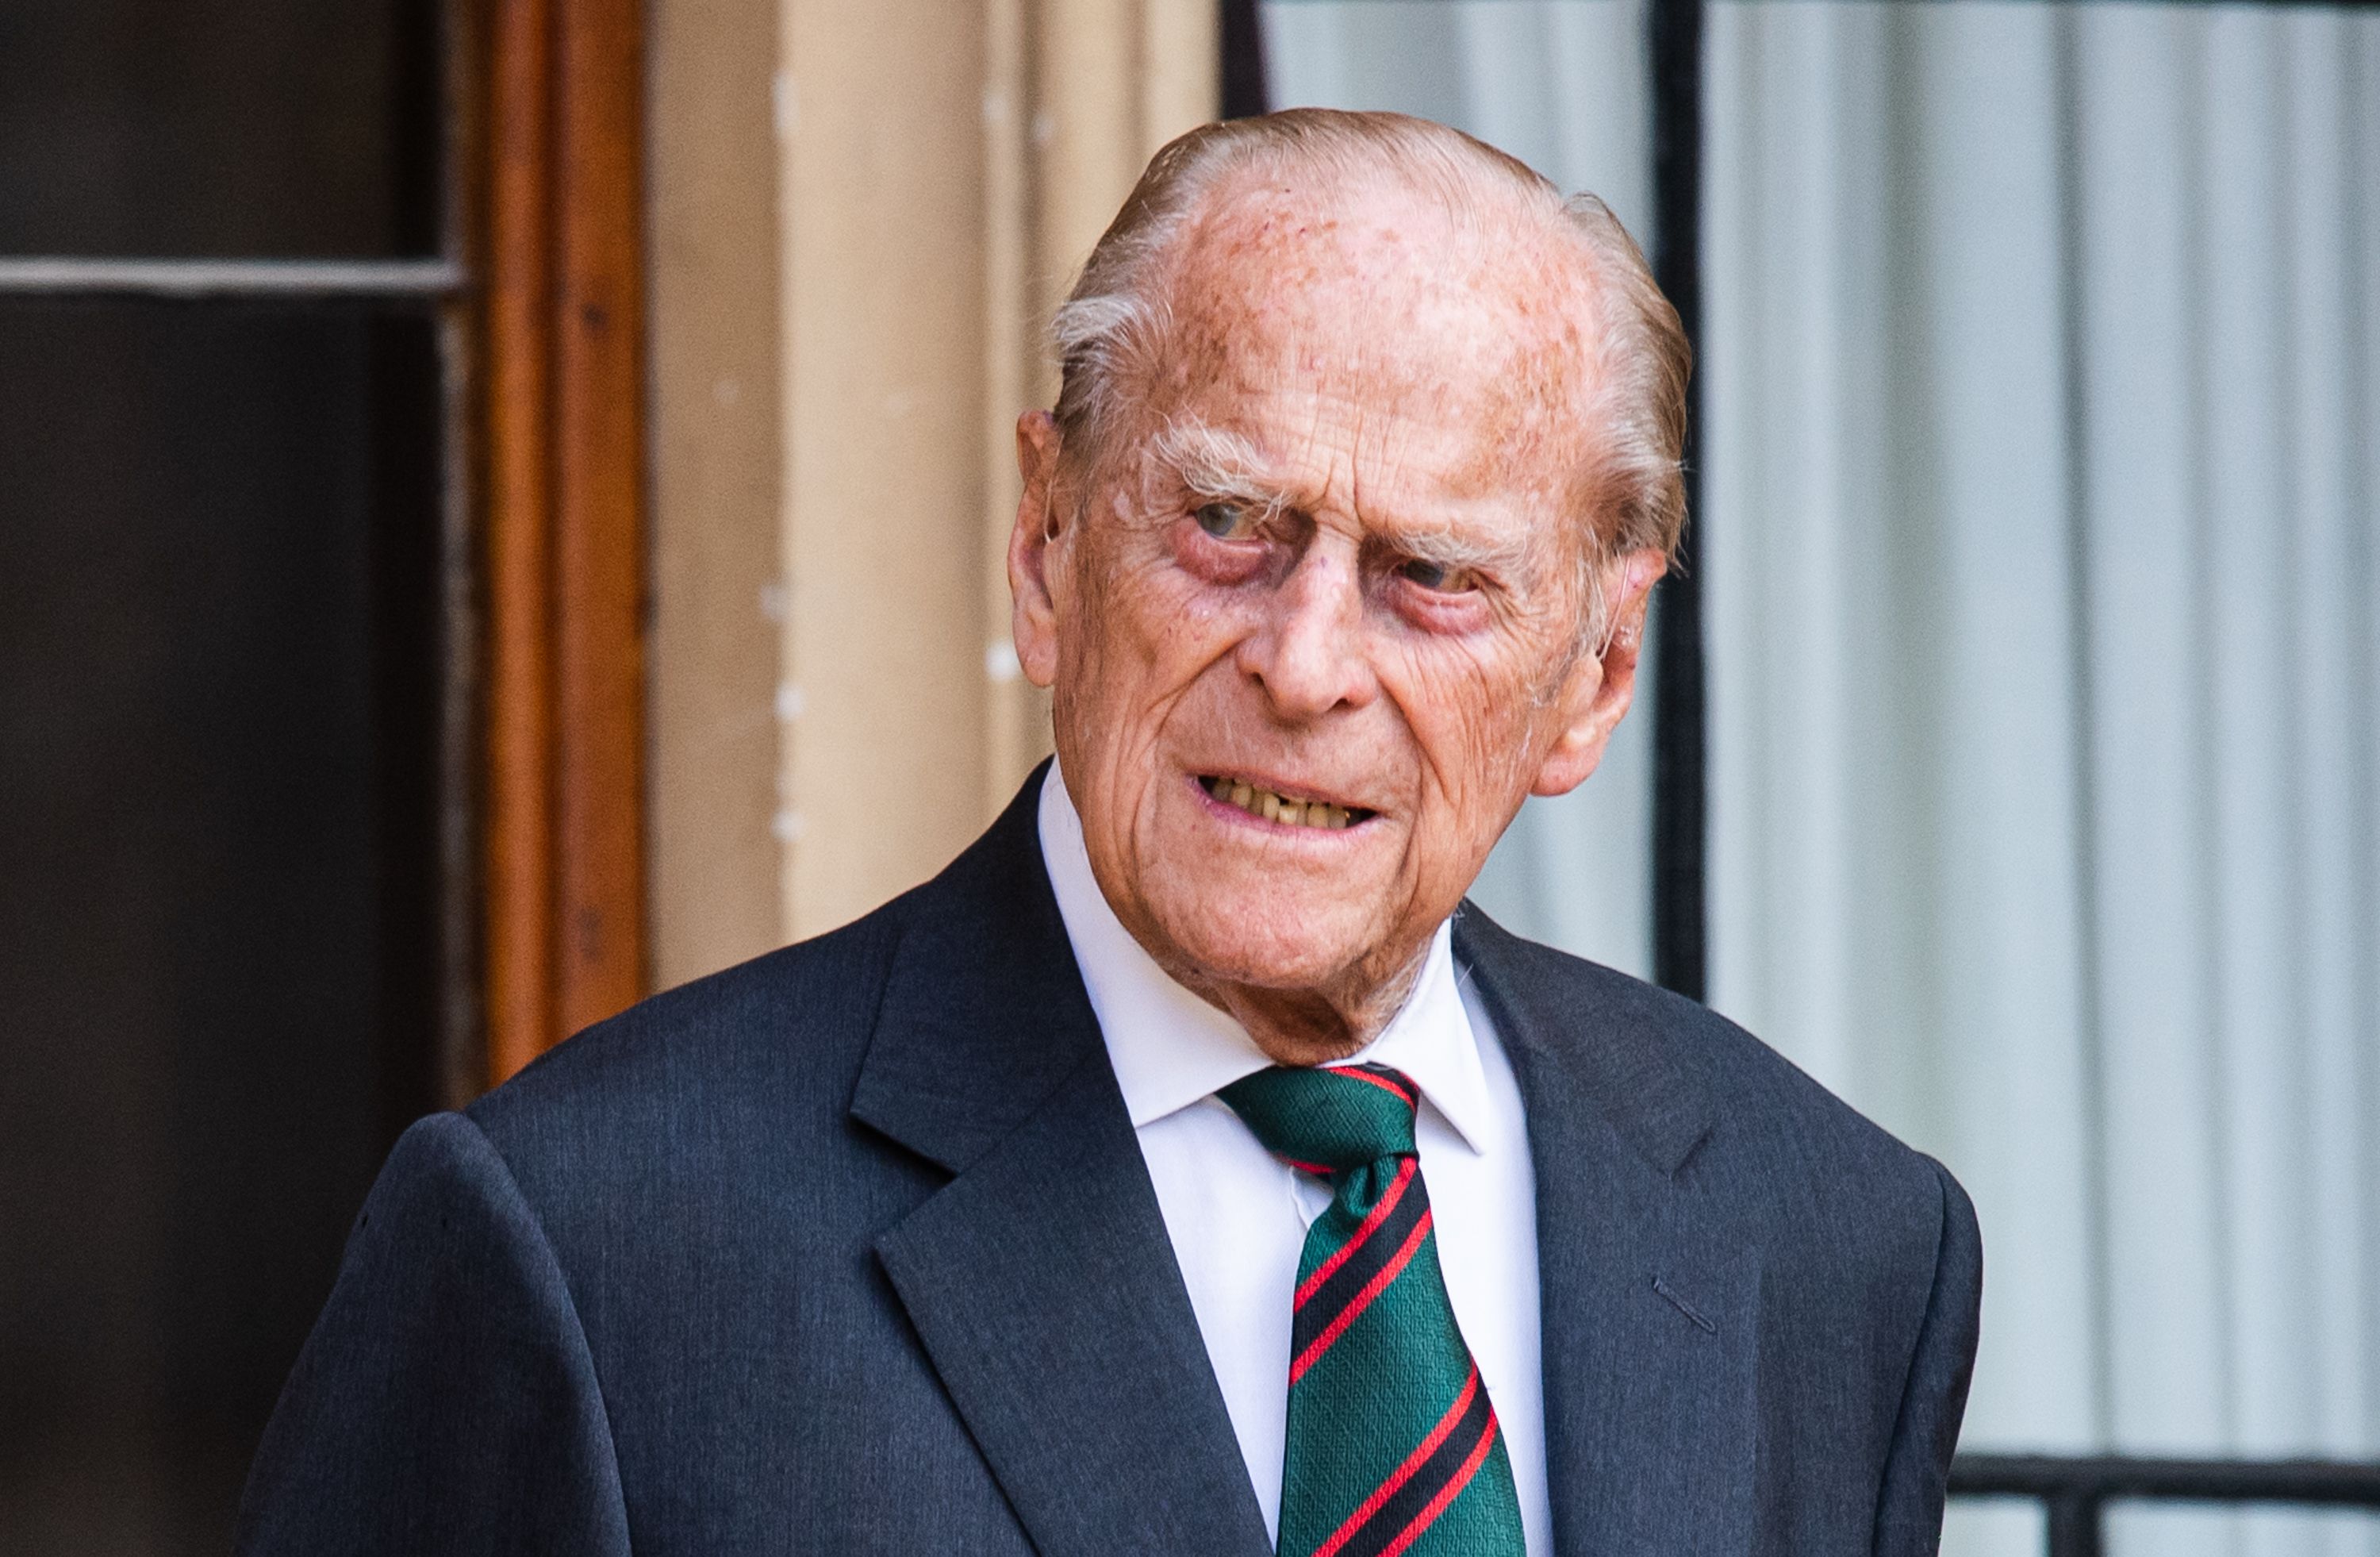 Prince Philip at the transfer of the Colonel-in-Chief of The Rifles at Windsor Castle on July 22, 2020. | Photo: Getty Images